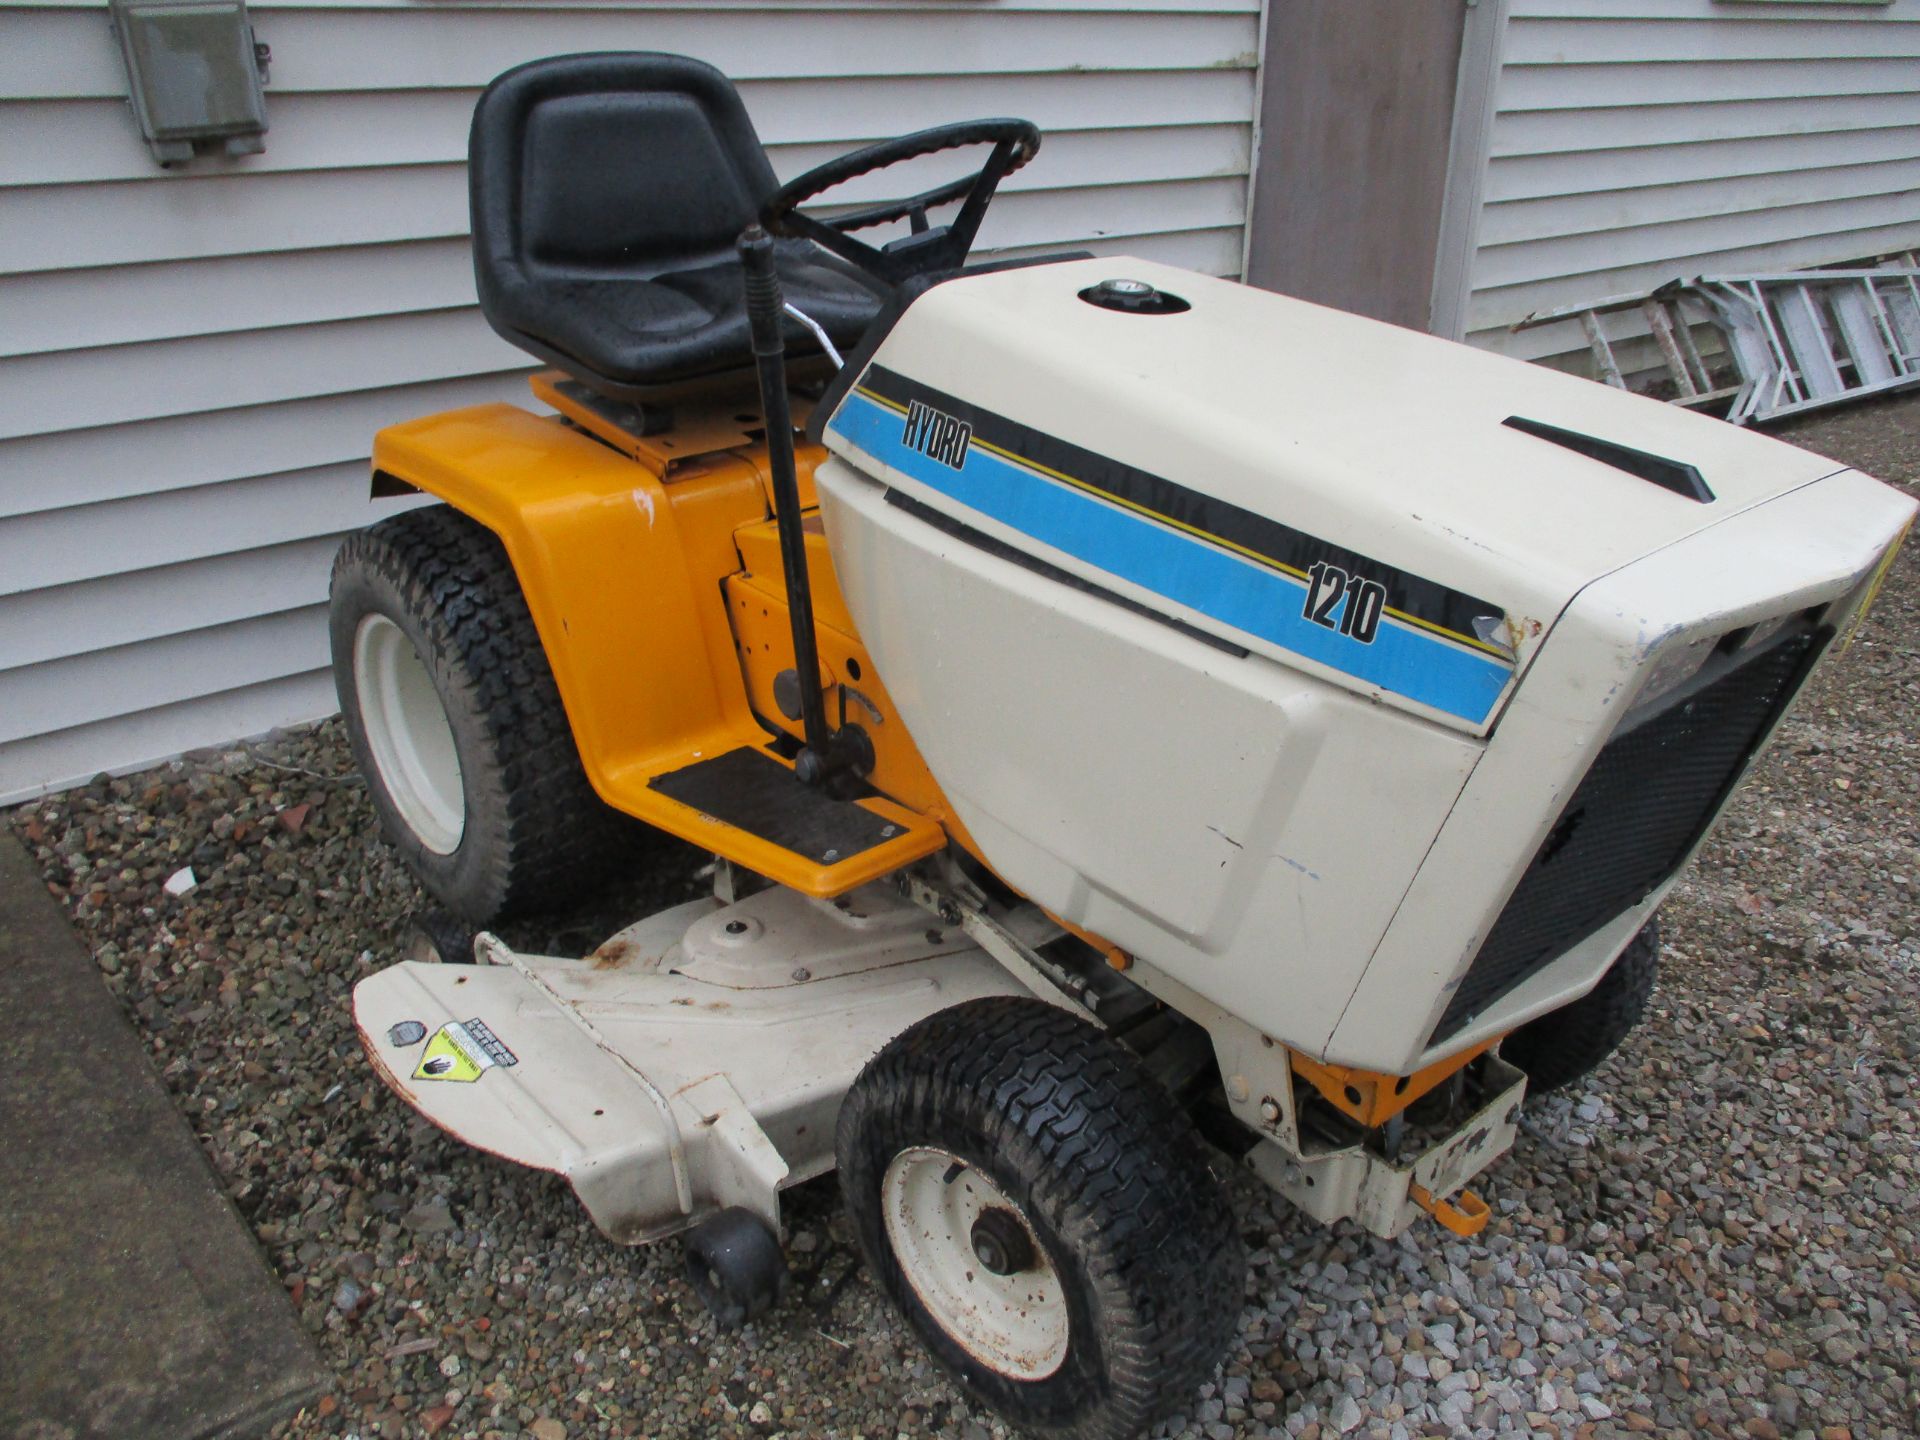 Cub Cadet Model 1210 Hydro Riding Lawn Mower, s/n 784497, 44" Mowing Deck, Newly Rebuilt Engine, - Image 2 of 7